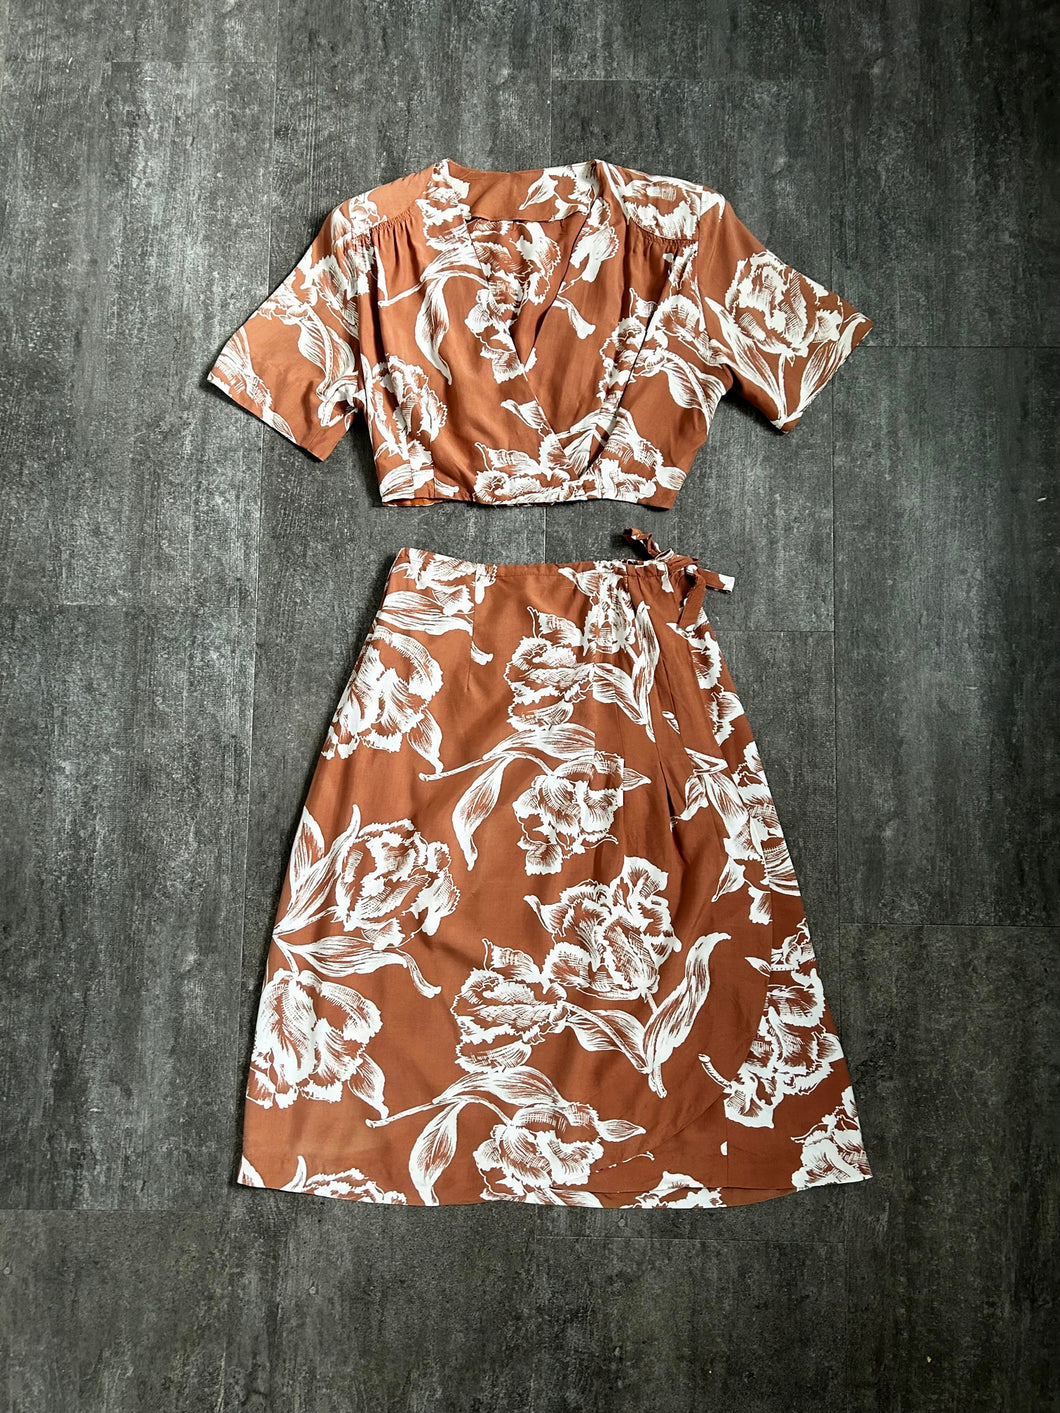 1940s dress set . vintage 40s crop top and skirt . size xs to s